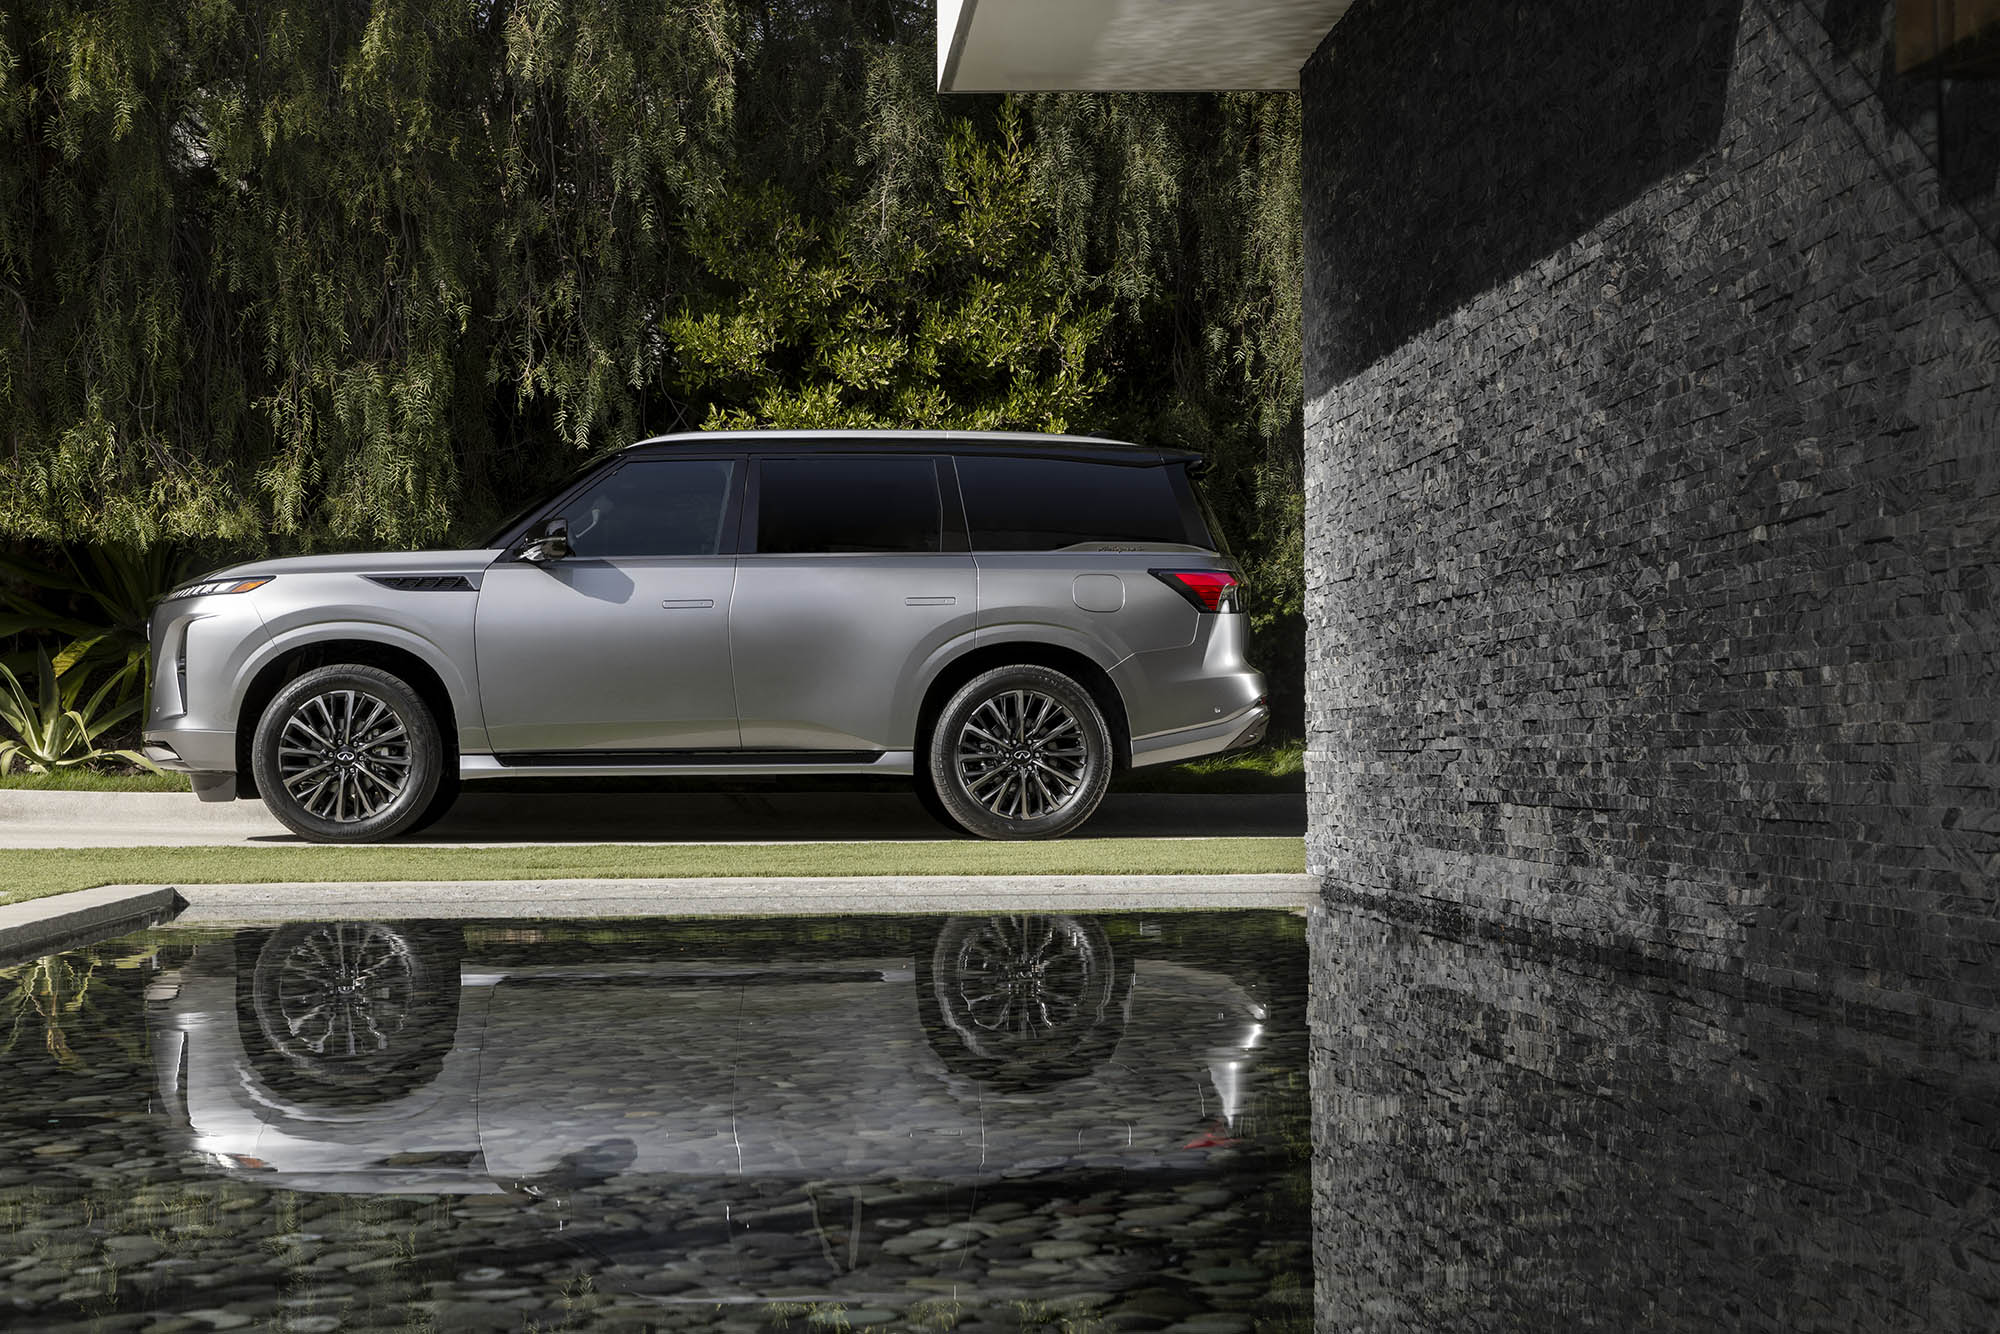 2025 Infiniti QX80 in gray, side profile view with pond reflection below